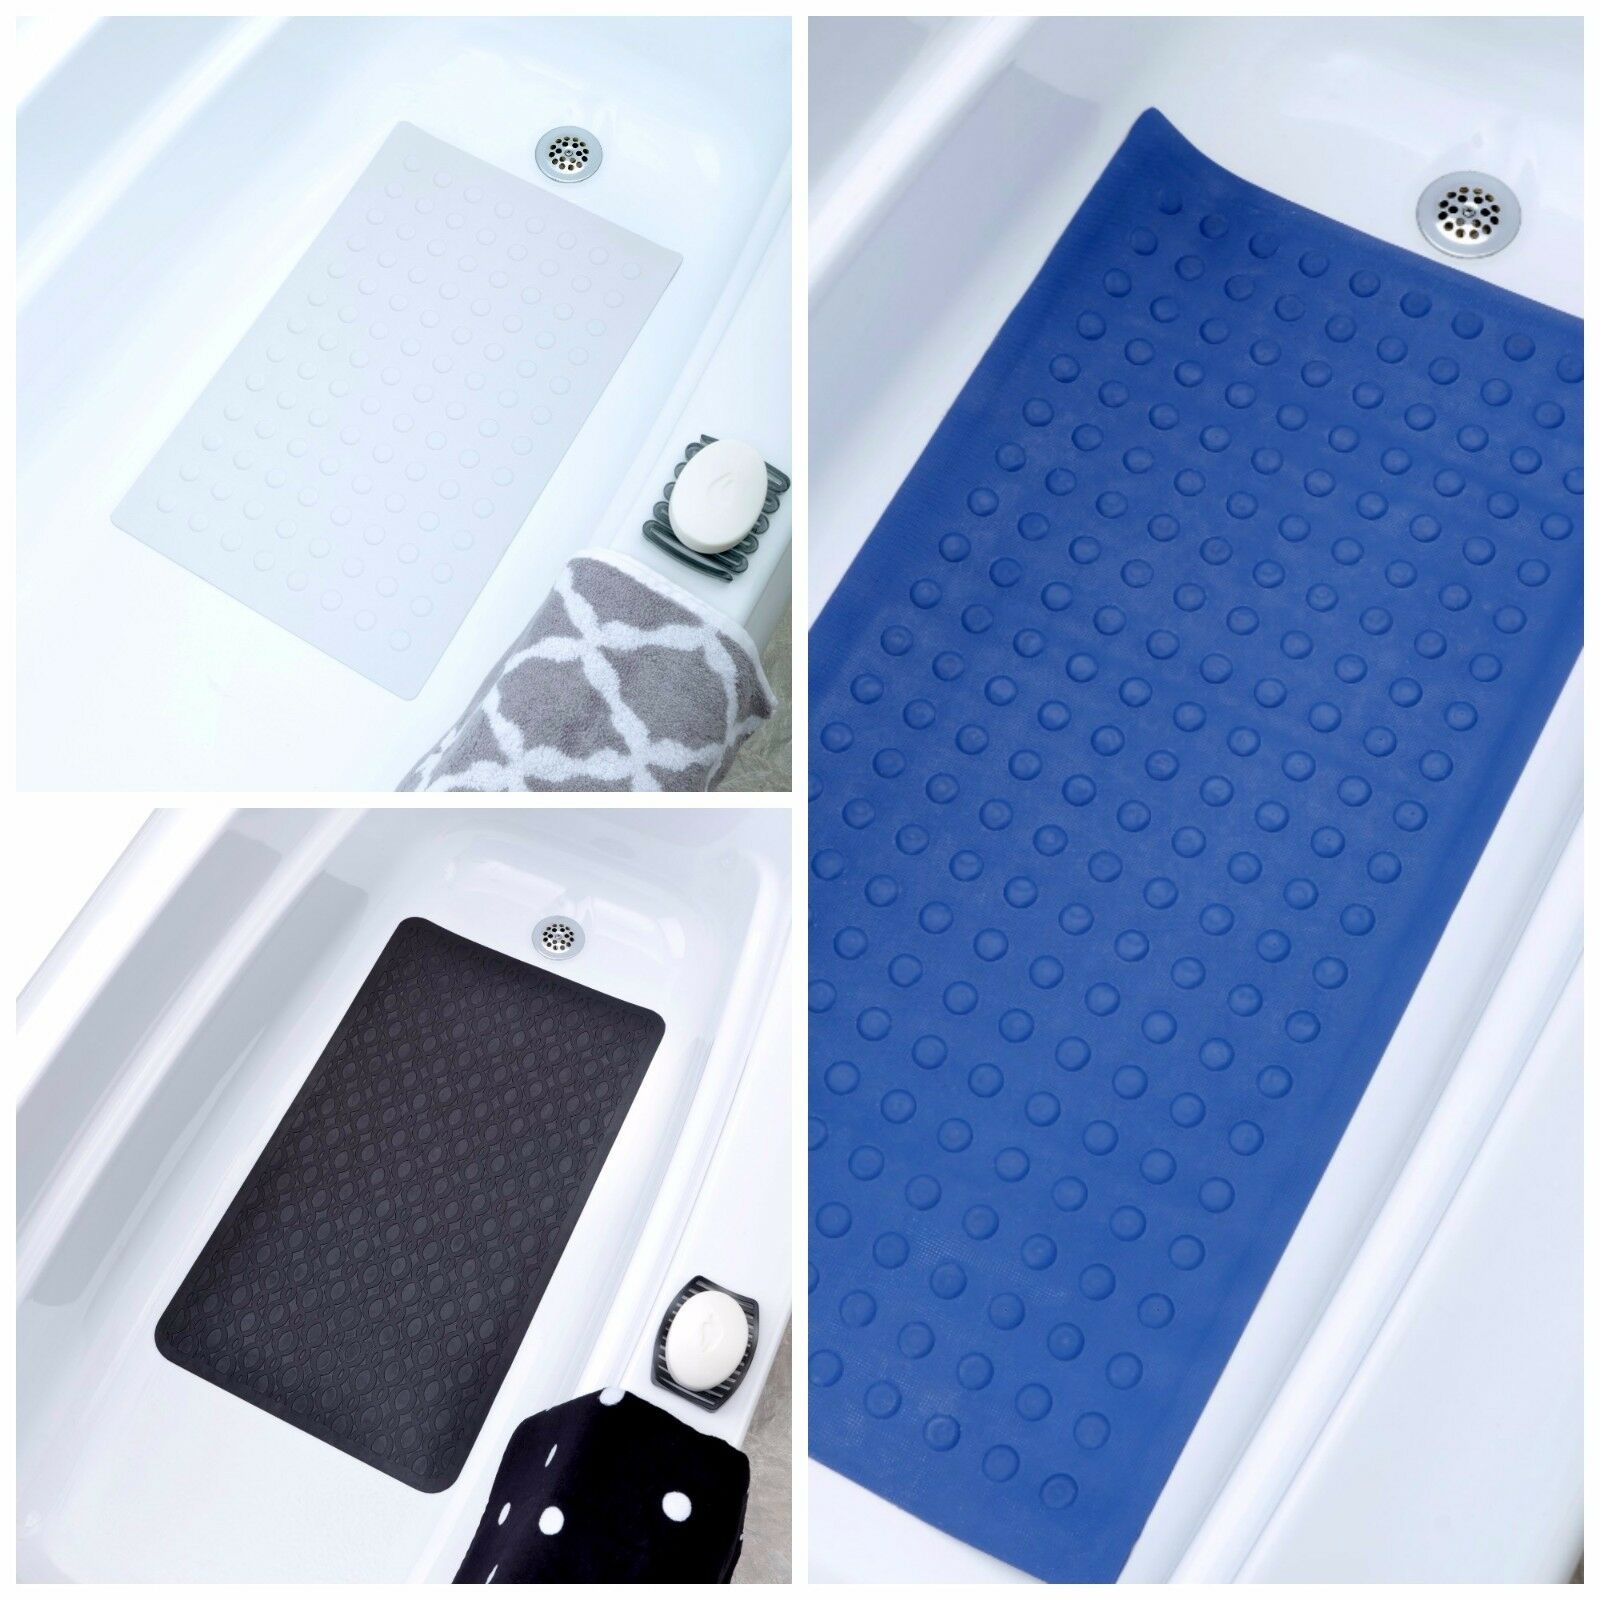 Medium, Large & Extra Long Rubber Bath Safety Mat With Suction Cups For Tubs